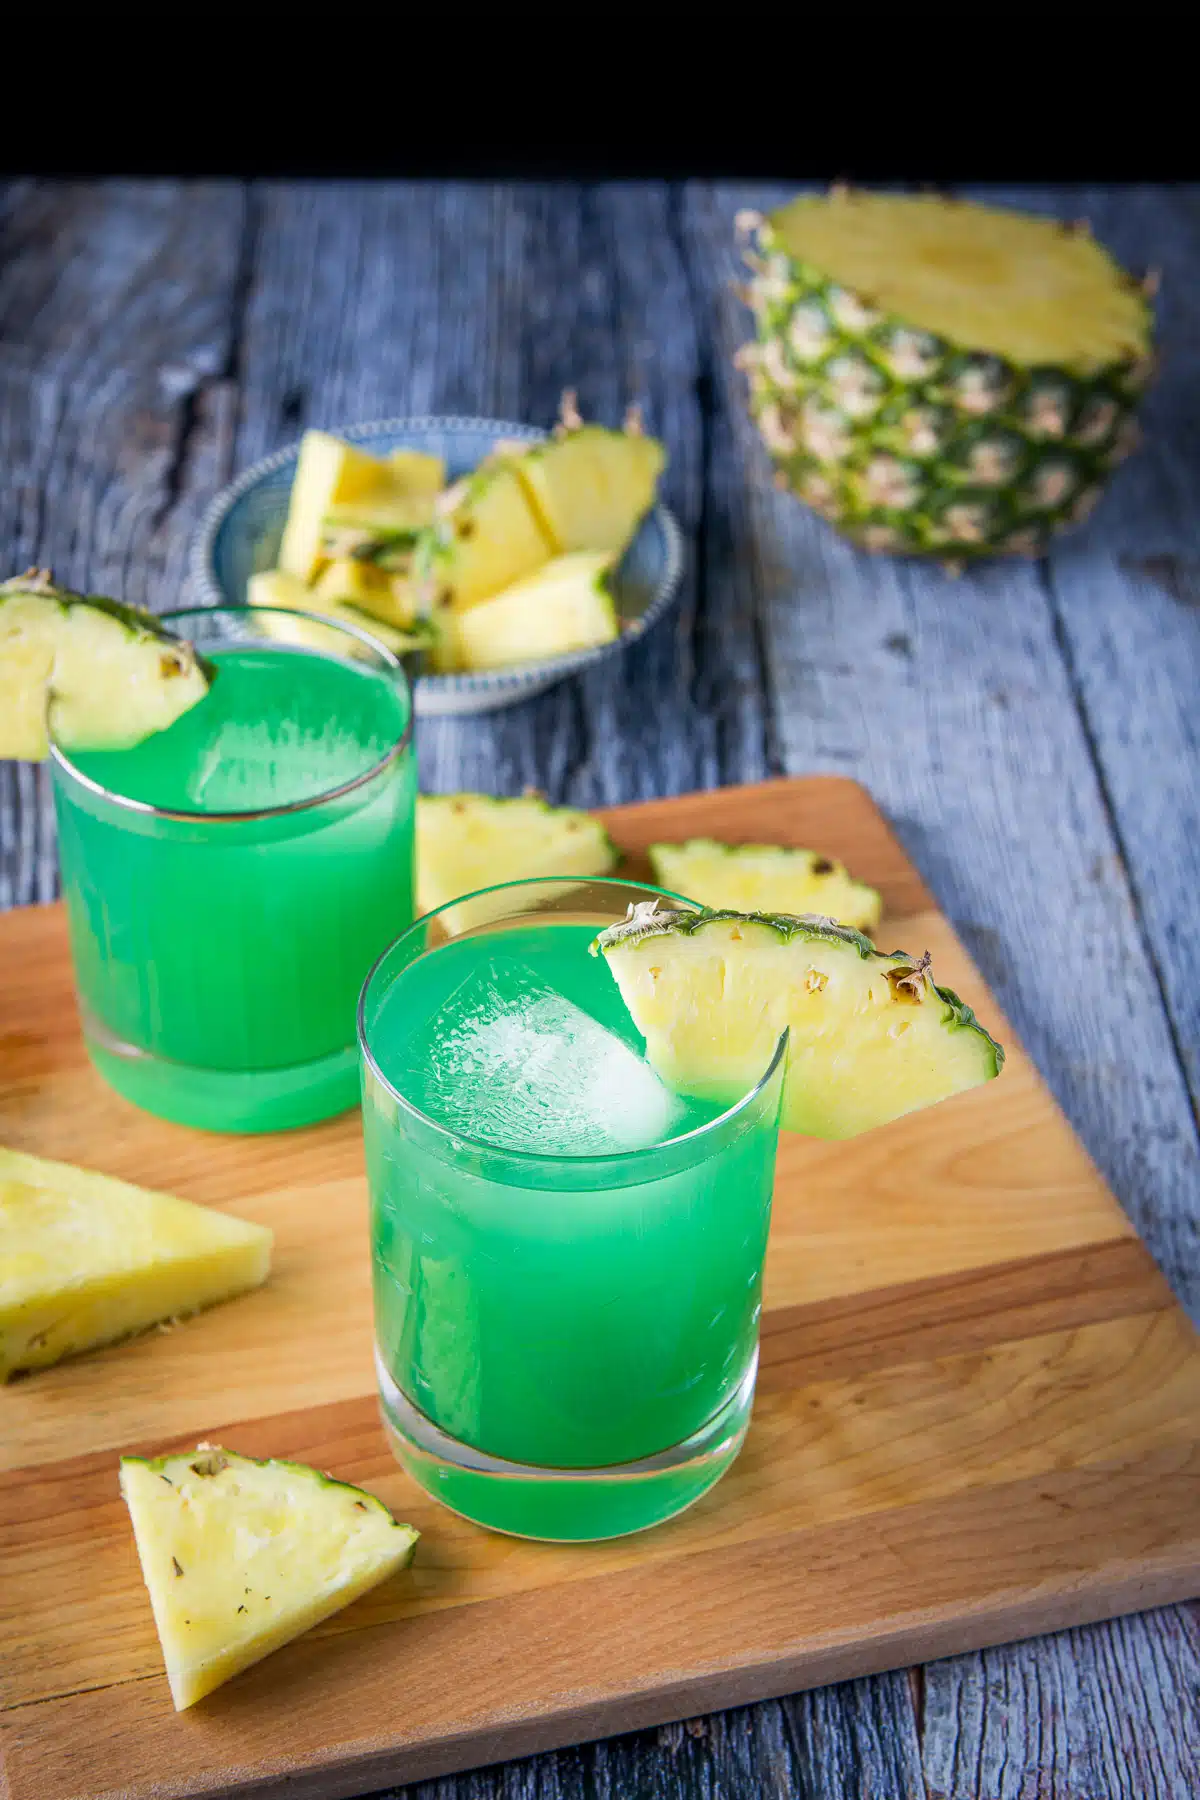 A square wood board with two glasses of a green drink with pineapple wedges as garnish